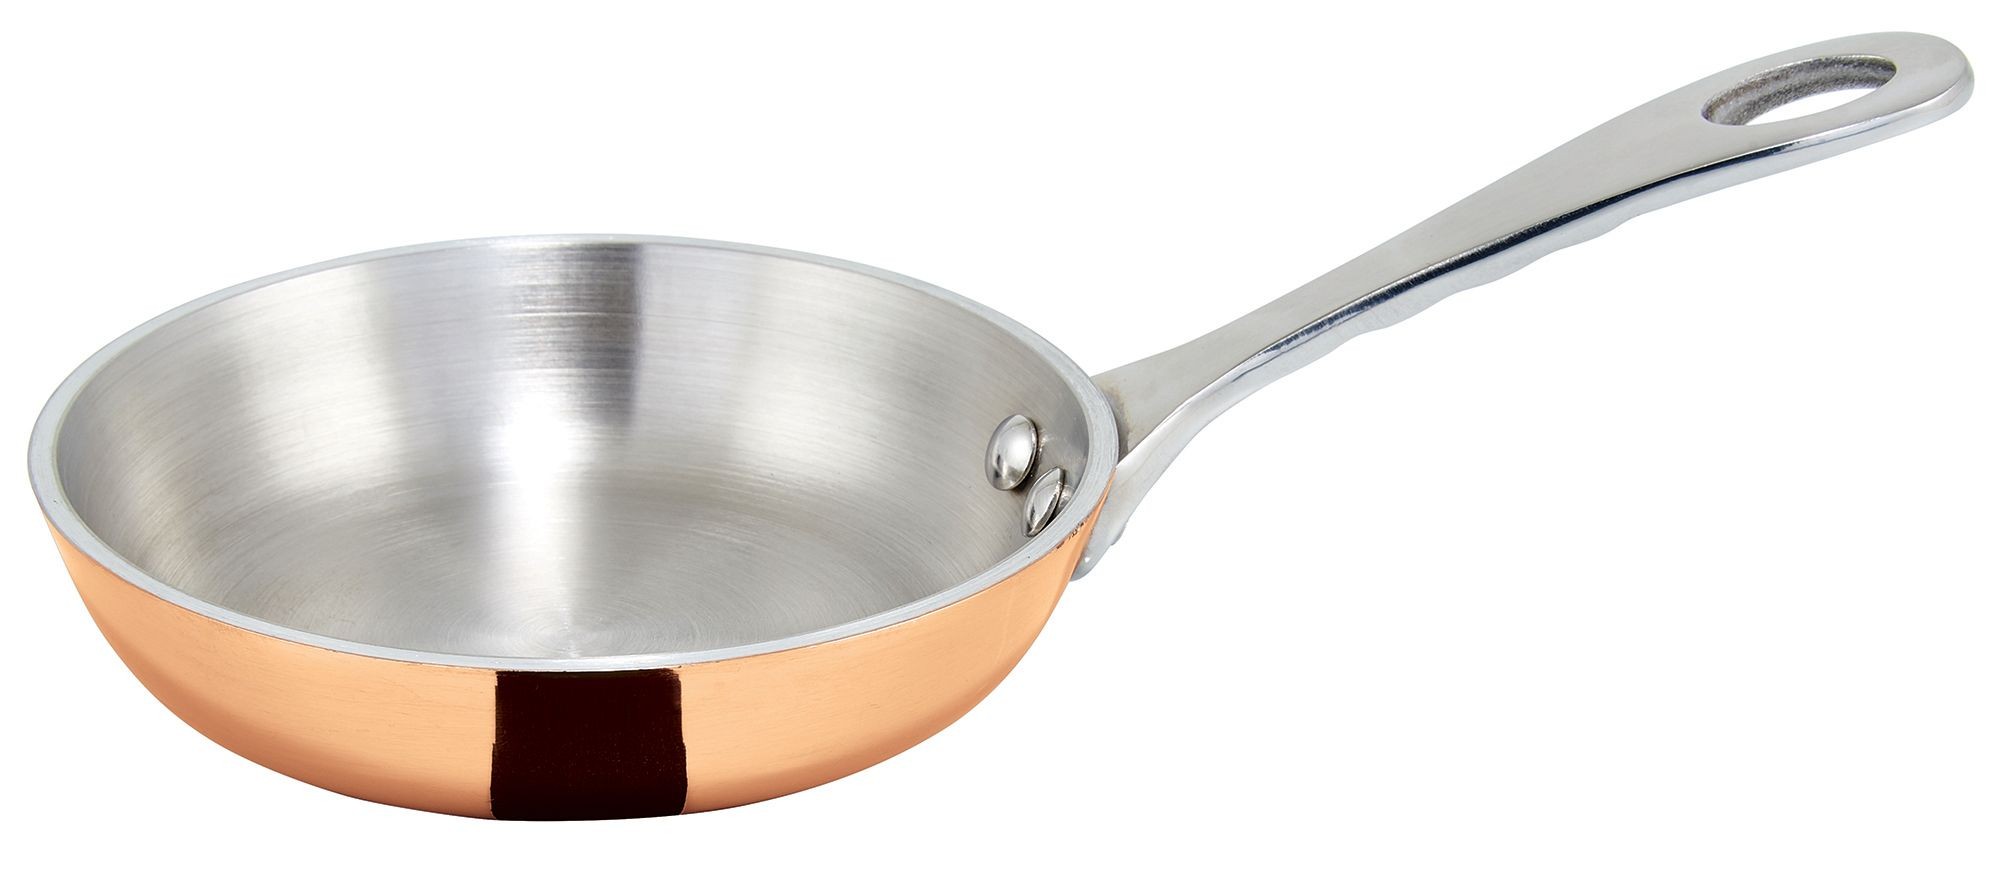 Winco DCFP-4C 4" Try-Ply Copper Plated 5 oz. Mini Fry Pan